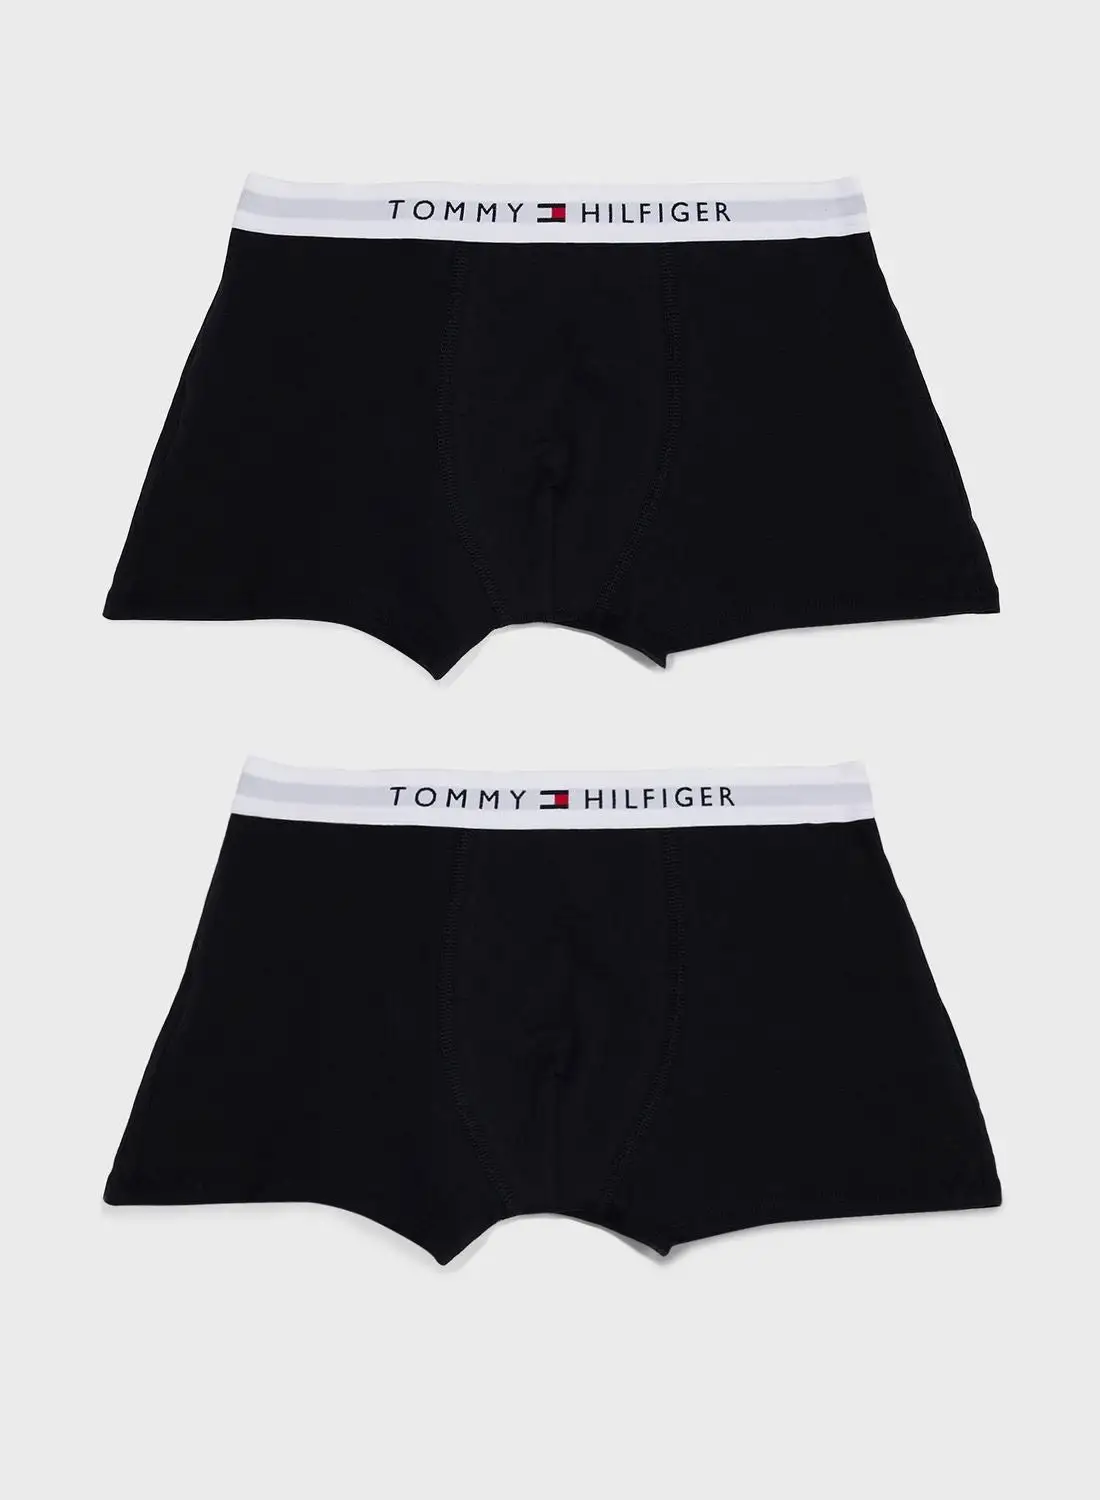 TOMMY HILFIGER Youth 2 Pack Logo Band Trunks